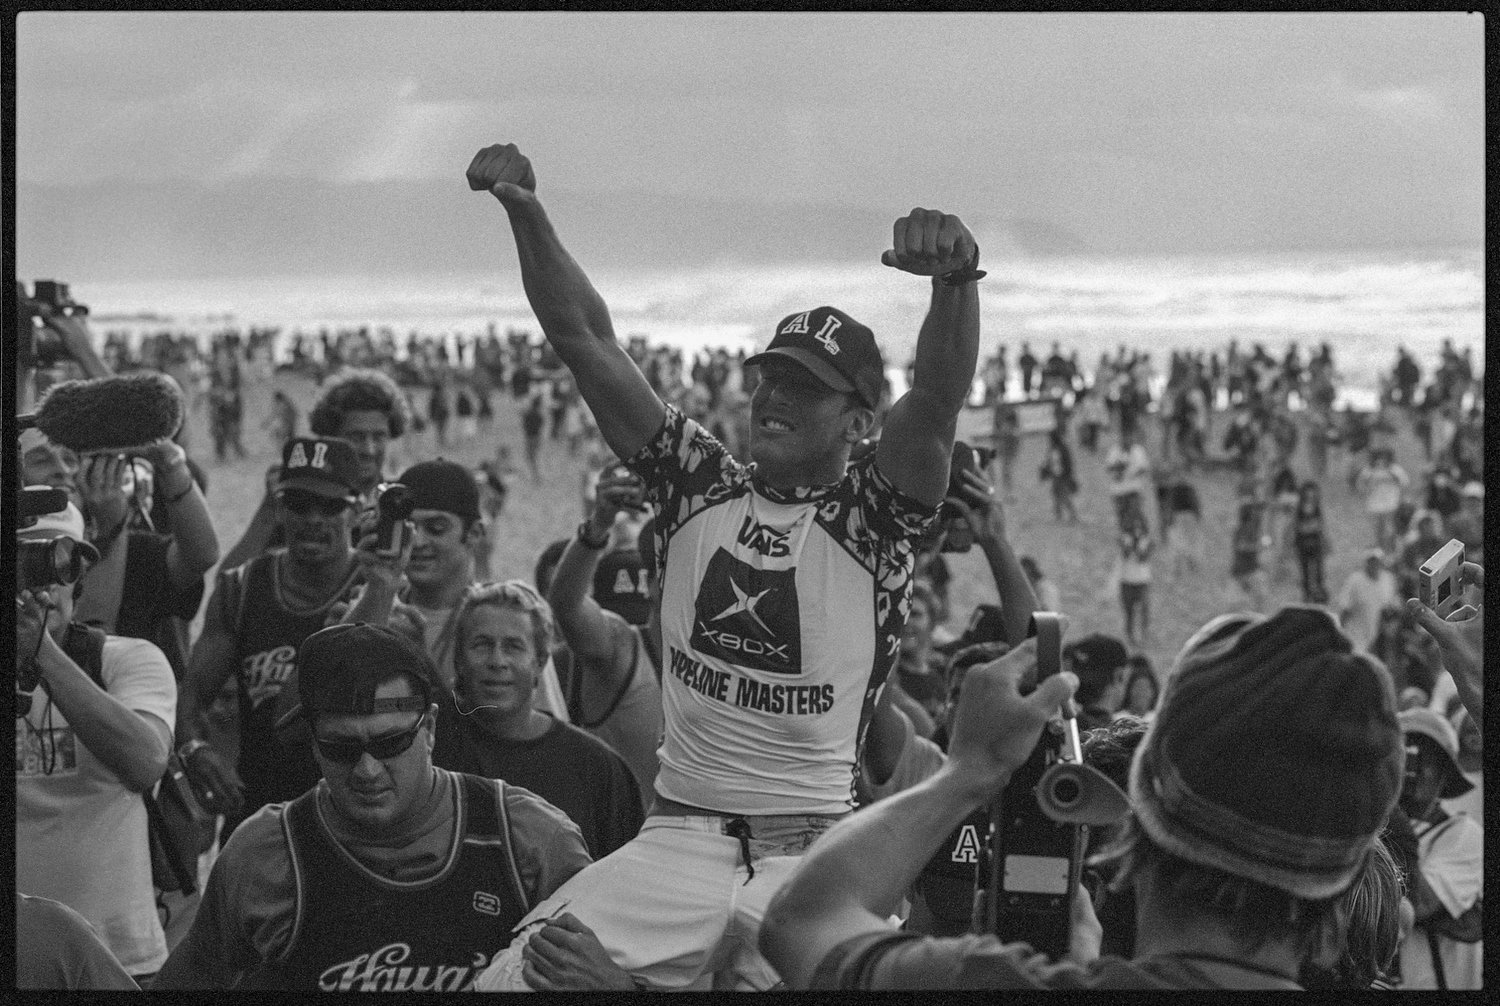 Andy Irons, 2002, Black and White Film